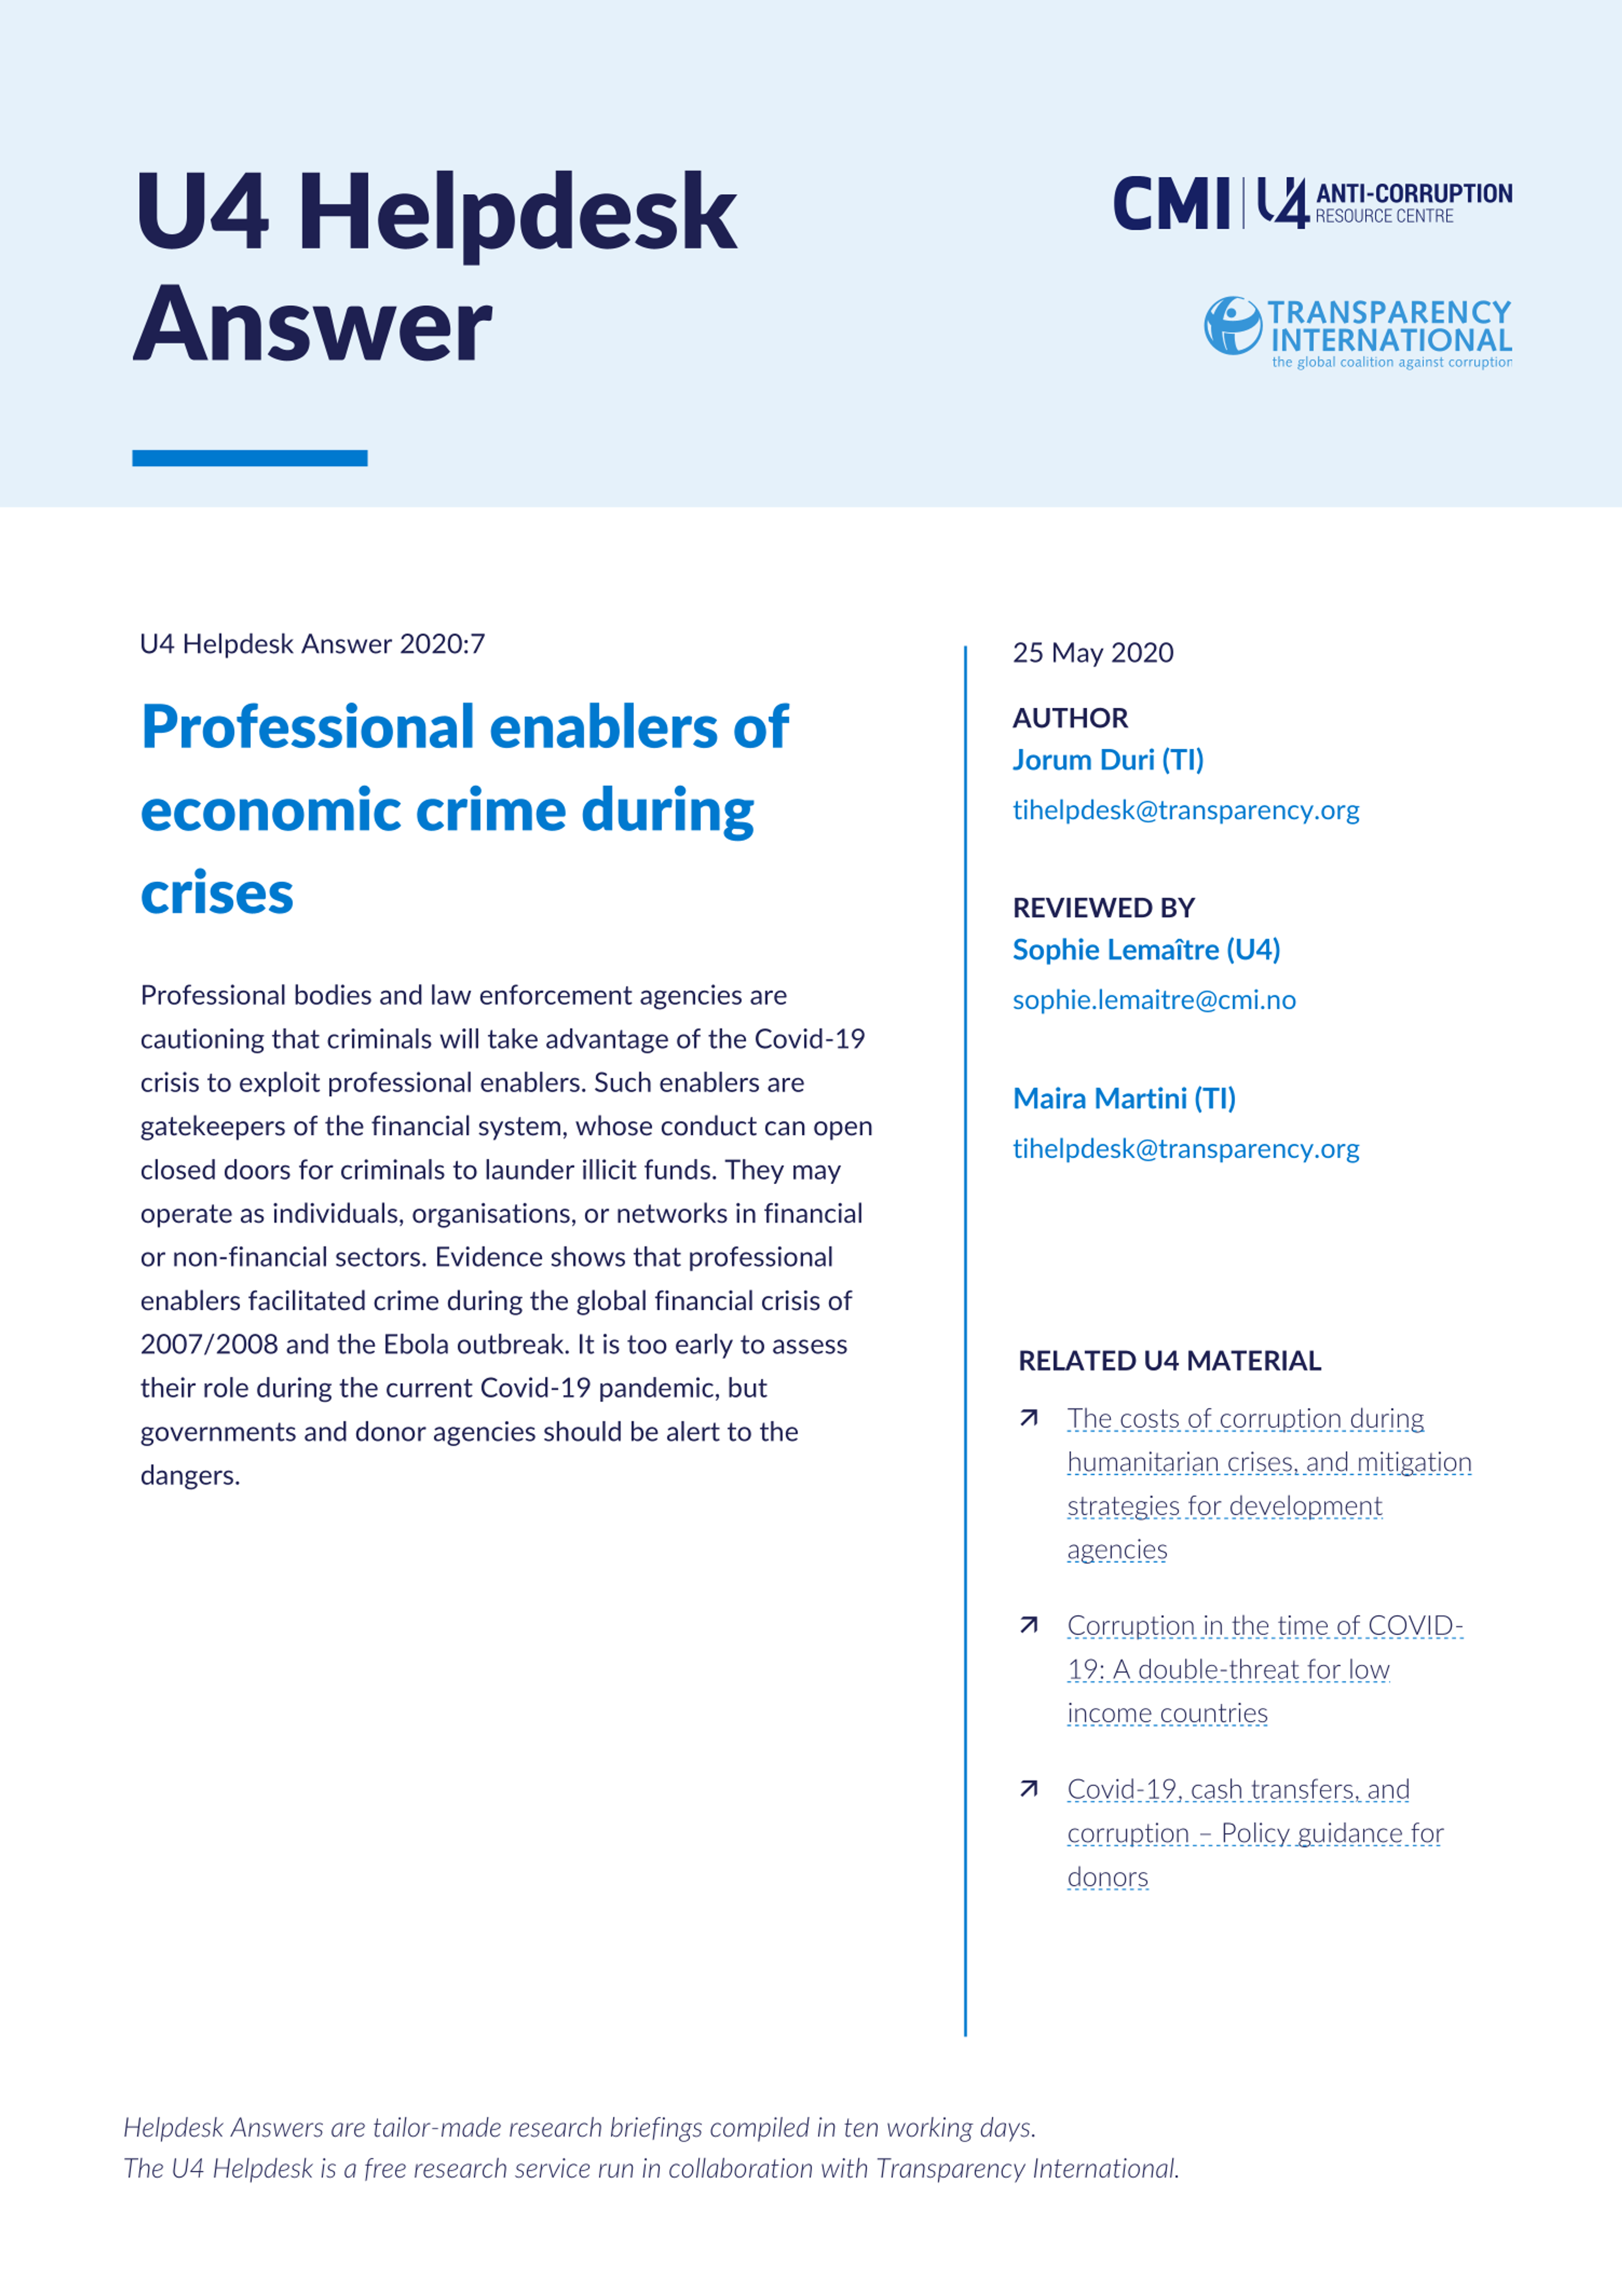 Professional enablers of economic crime during crises